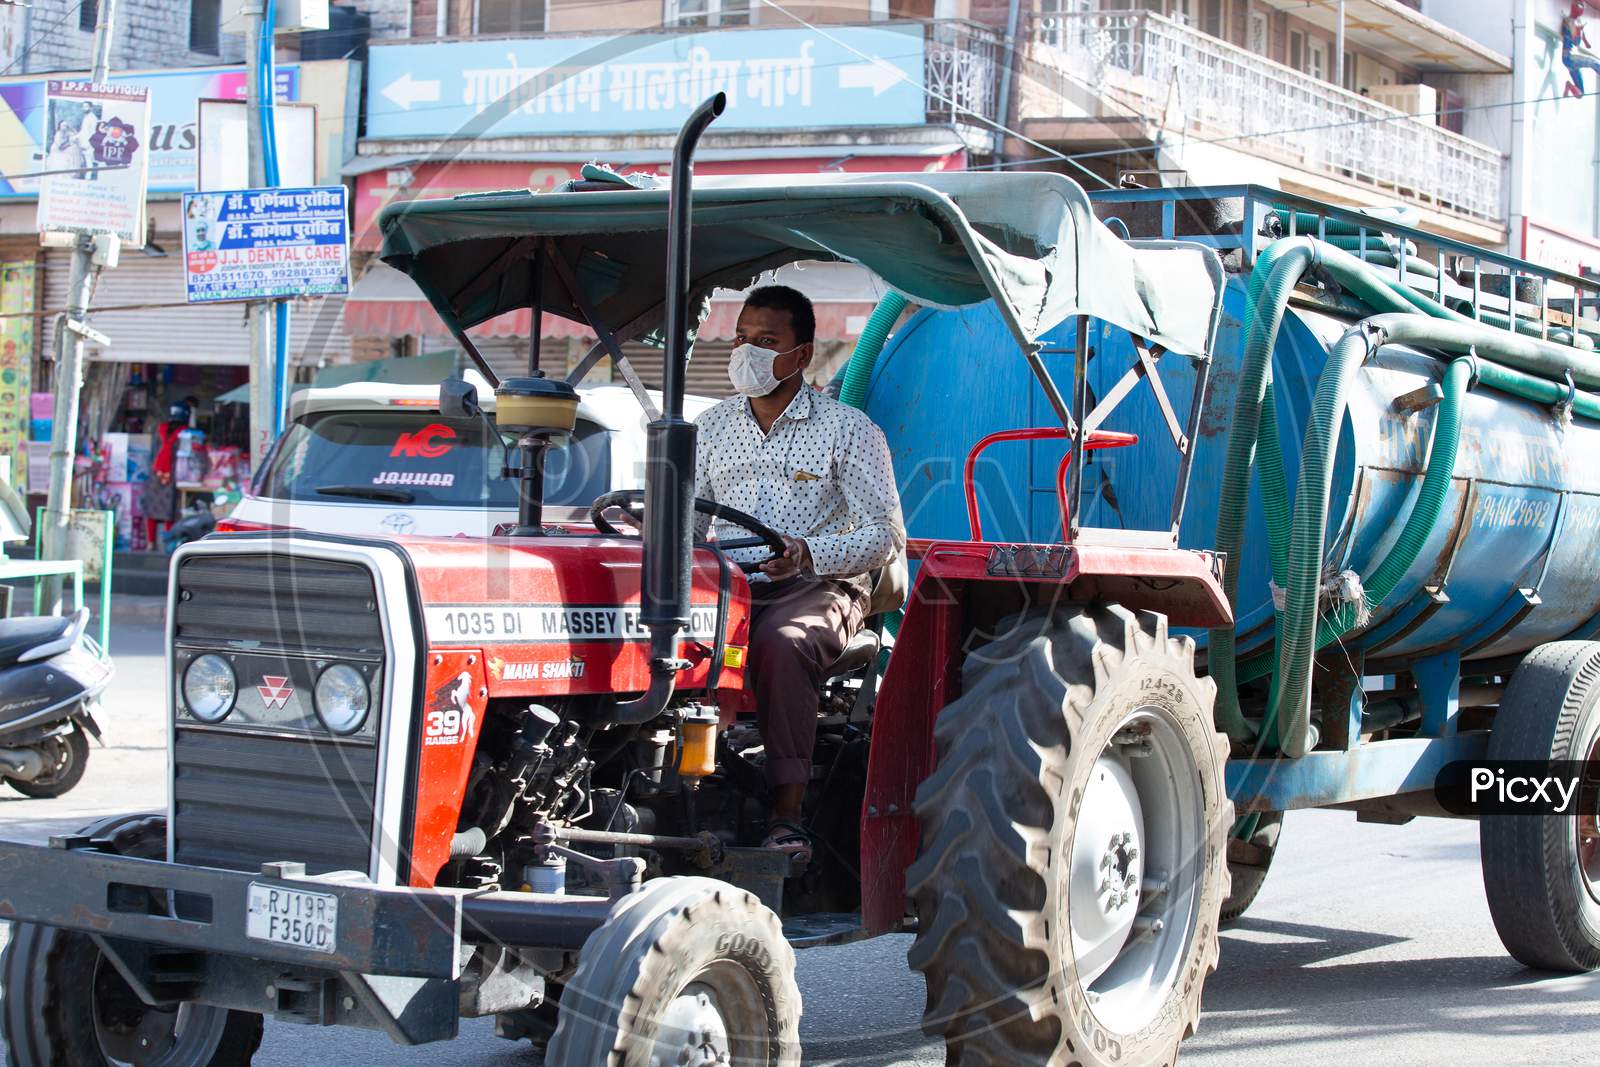 Jodhpur, Rajasthan, India - May 20 2020: People Coming Out, Transportation Started After Lock Down Restrictions Due To Covid-19 Pandemic, Back To The Normal Life With Few Safety Measure.